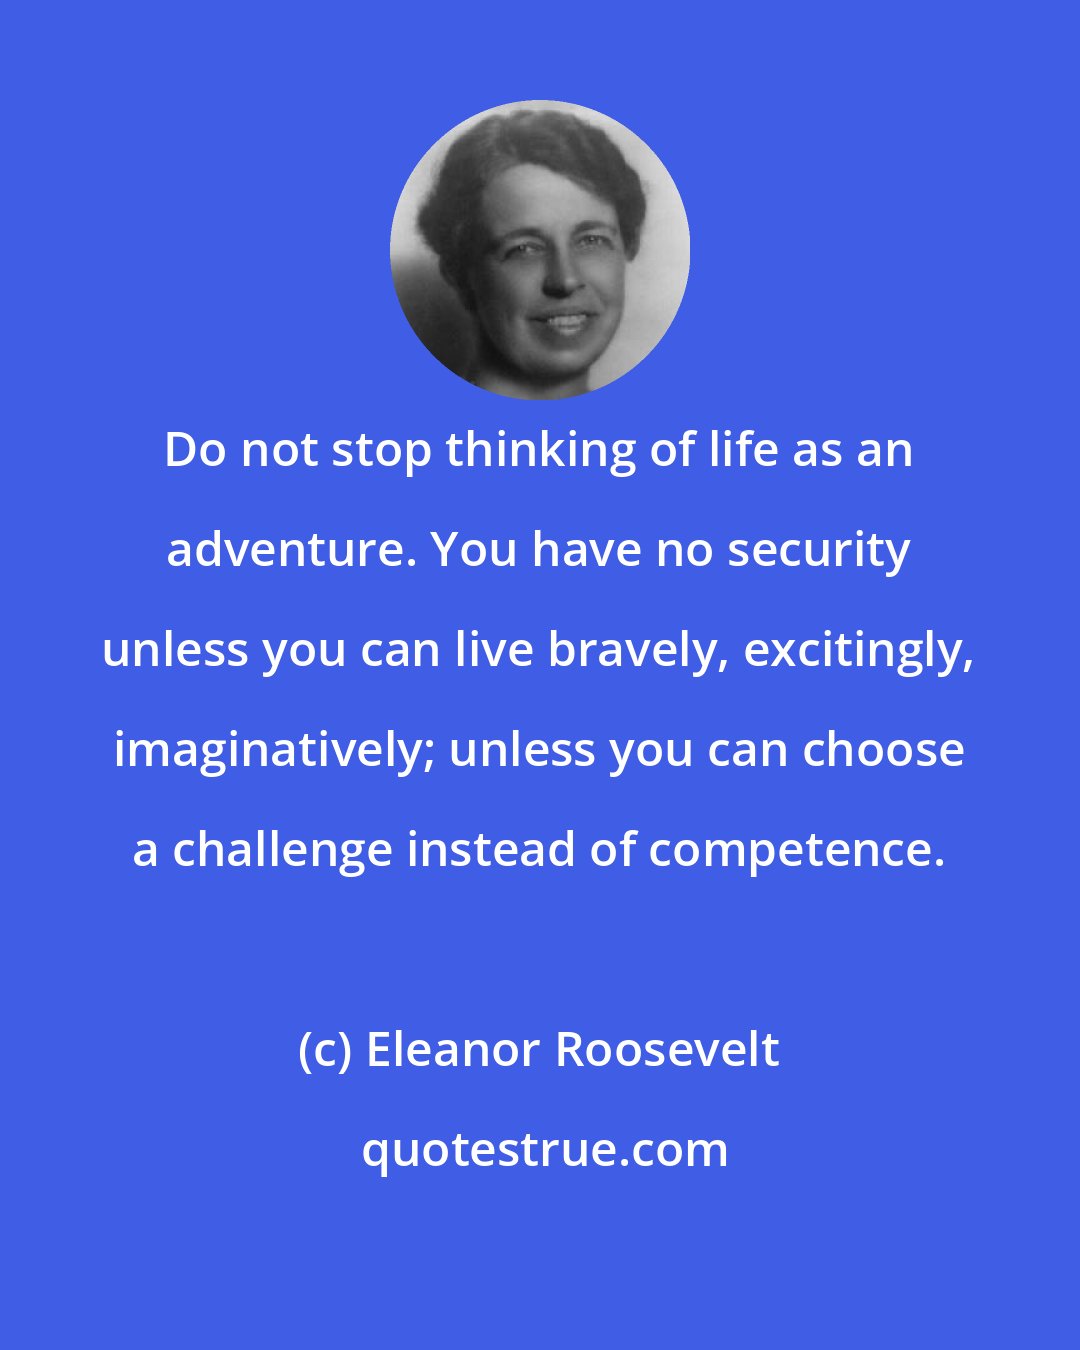 Eleanor Roosevelt: Do not stop thinking of life as an adventure. You have no security unless you can live bravely, excitingly, imaginatively; unless you can choose a challenge instead of competence.